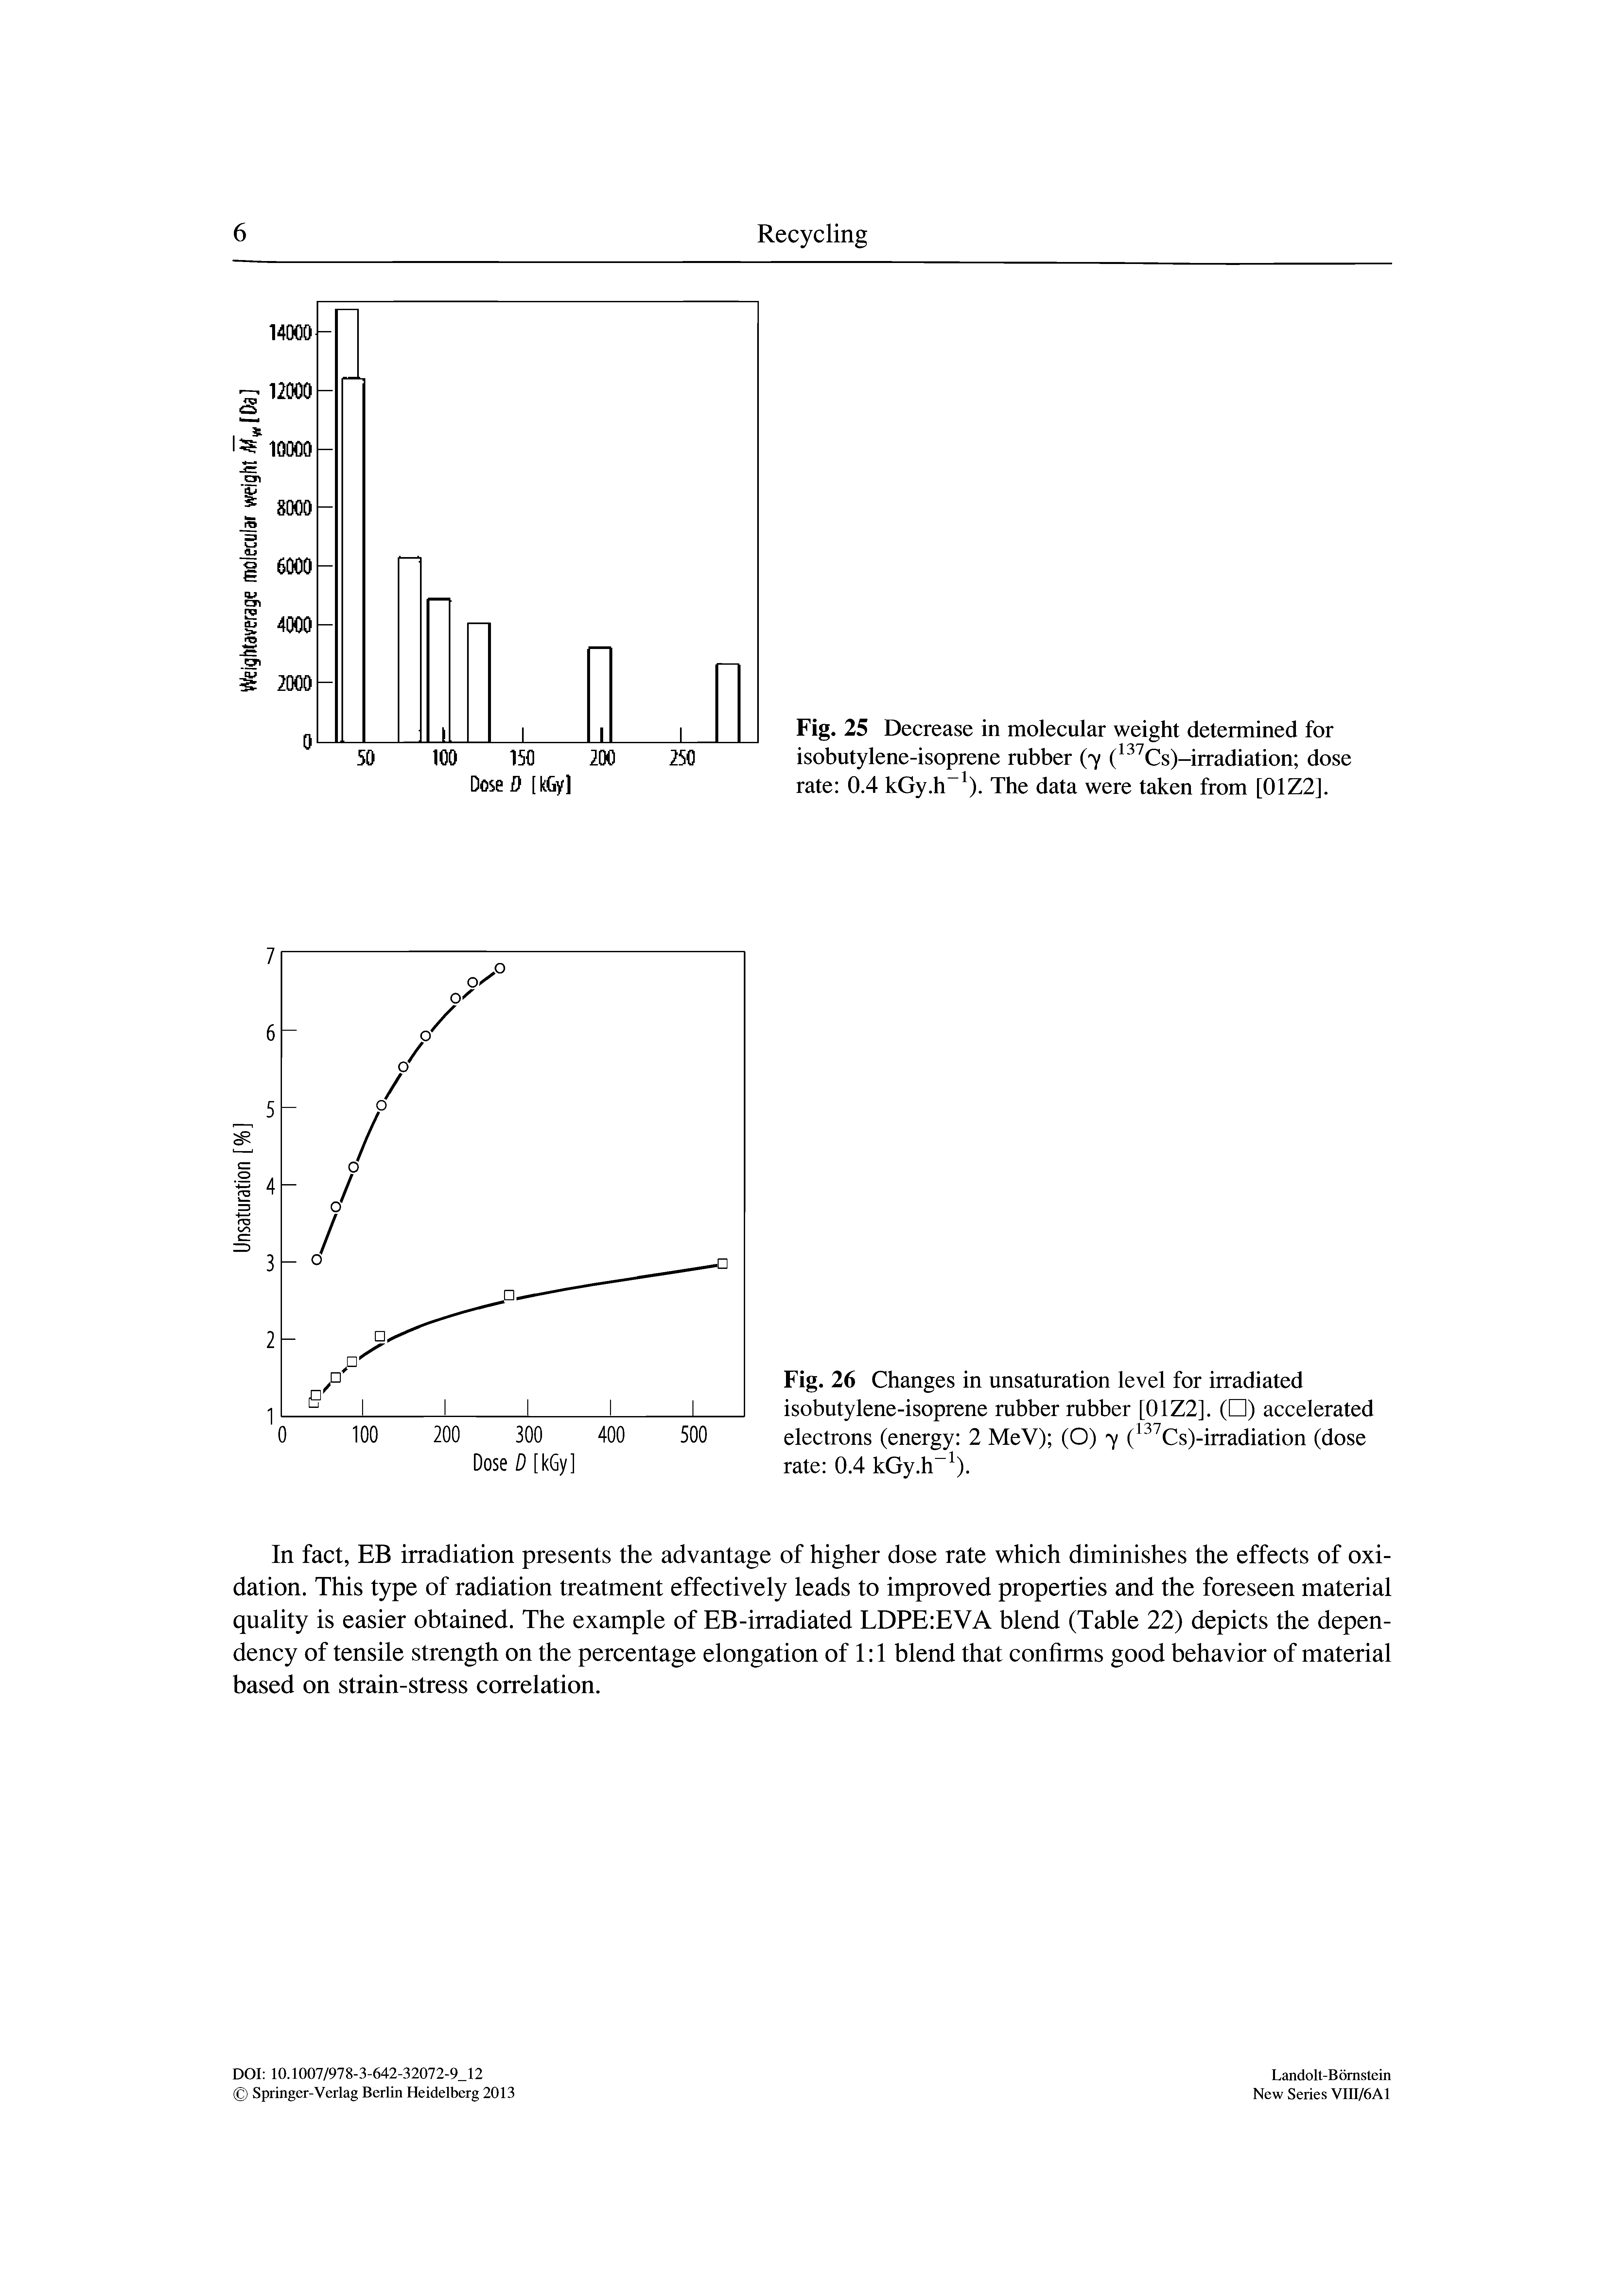 Fig. 26 Changes in unsaturation level for irradiated isobutylene-isoprene rubber rubber [01Z2]. ( ) accelerated electrons (energy 2 MeV) (O) 7 ( Cs)-irradiation (dose rate 0.4 kGy.h ).